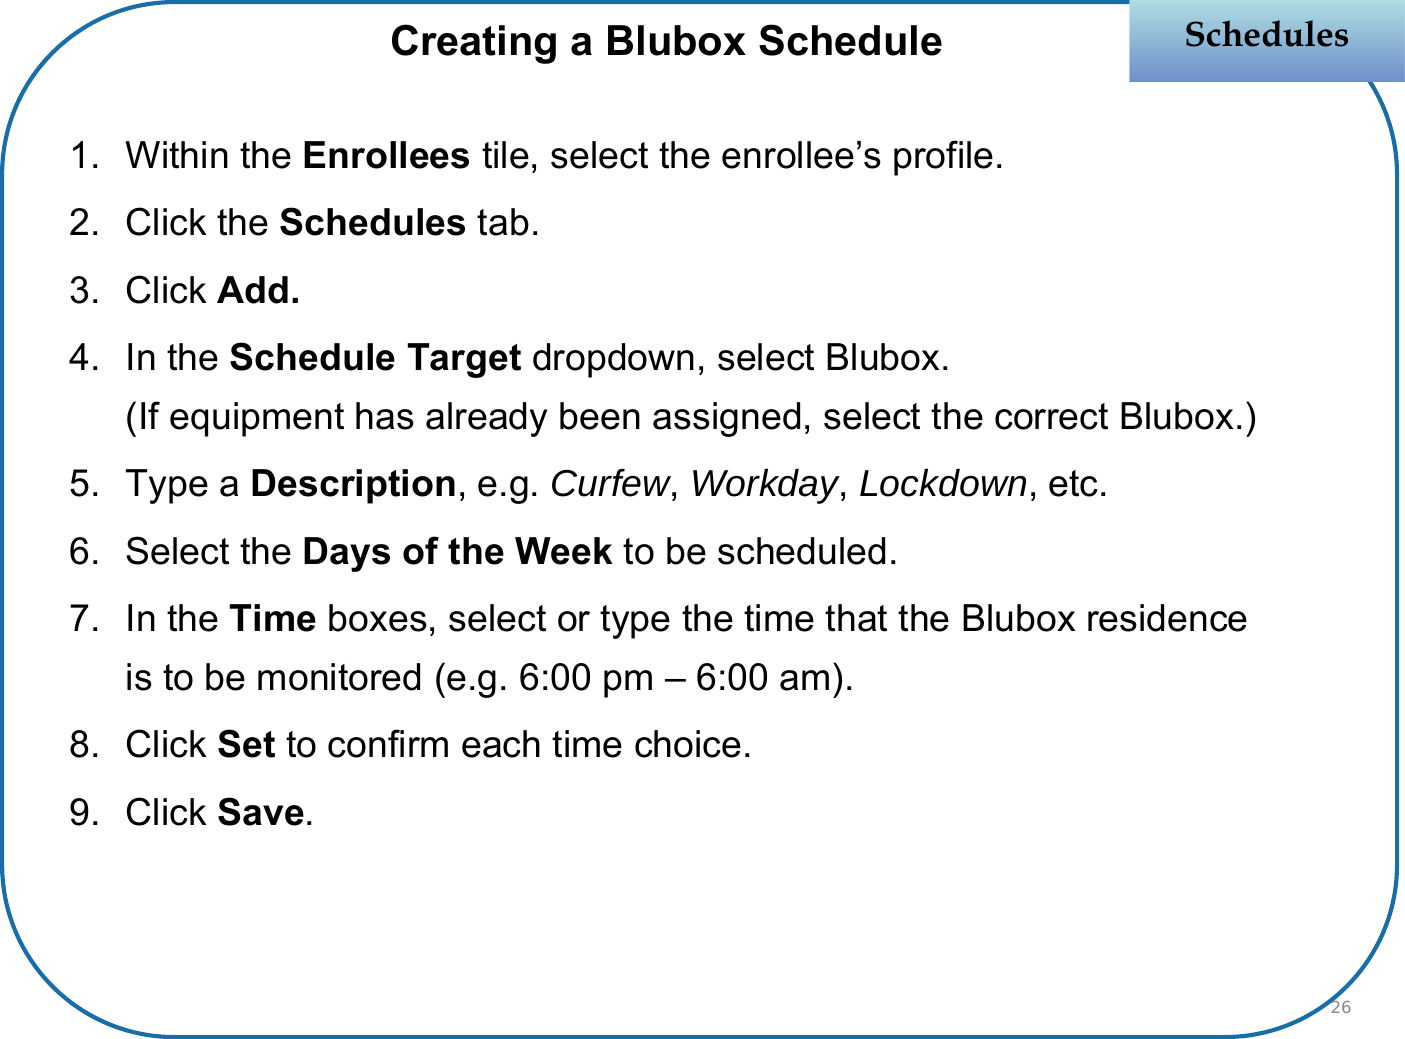 1. Within the Enrollees tile, select the enrollee’s profile.2. Click the Schedules tab.3. Click Add.4. In the Schedule Target dropdown, select Blubox.(If equipment has already been assigned, select the correct Blubox.)5. Type a Description, e.g. Curfew, Workday, Lockdown, etc.6. Select the Days of the Week to be scheduled.7. In the Time boxes, select or type the time that the Blubox residence is to be monitored (e.g. 6:00 pm – 6:00 am).8. Click Set to confirm each time choice.9. Click Save.SchedulesSchedulesCreating a Blubox Schedule26